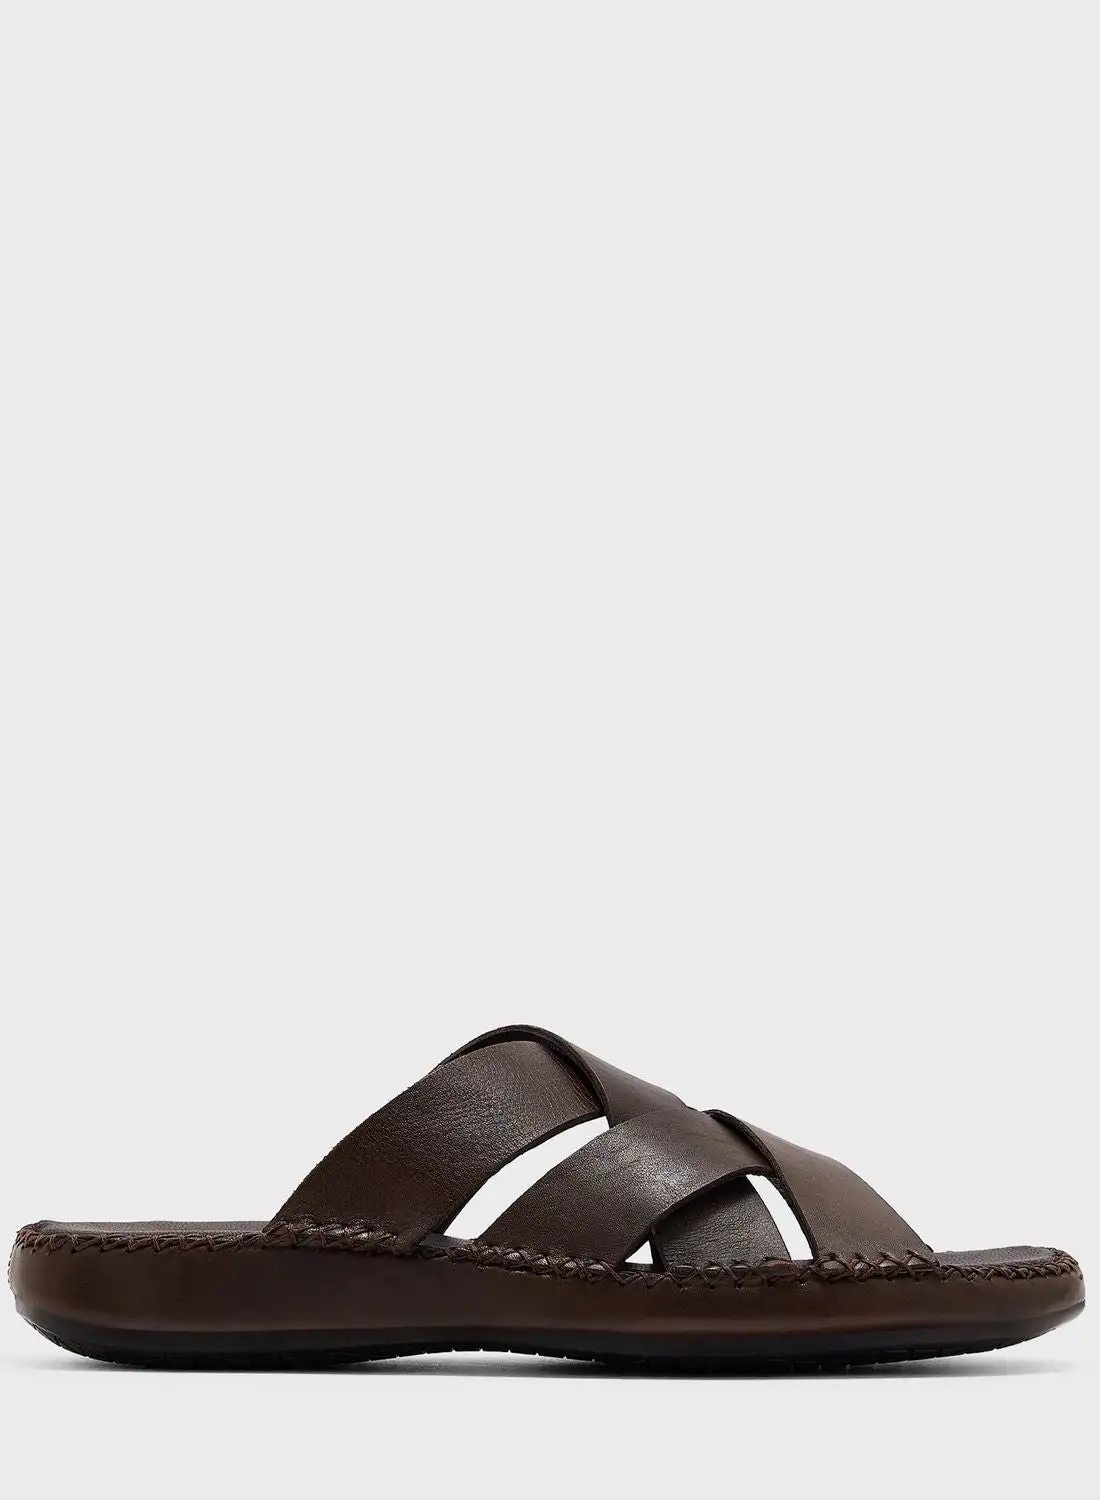 Hush Puppies Casual Slip Ons Sandals